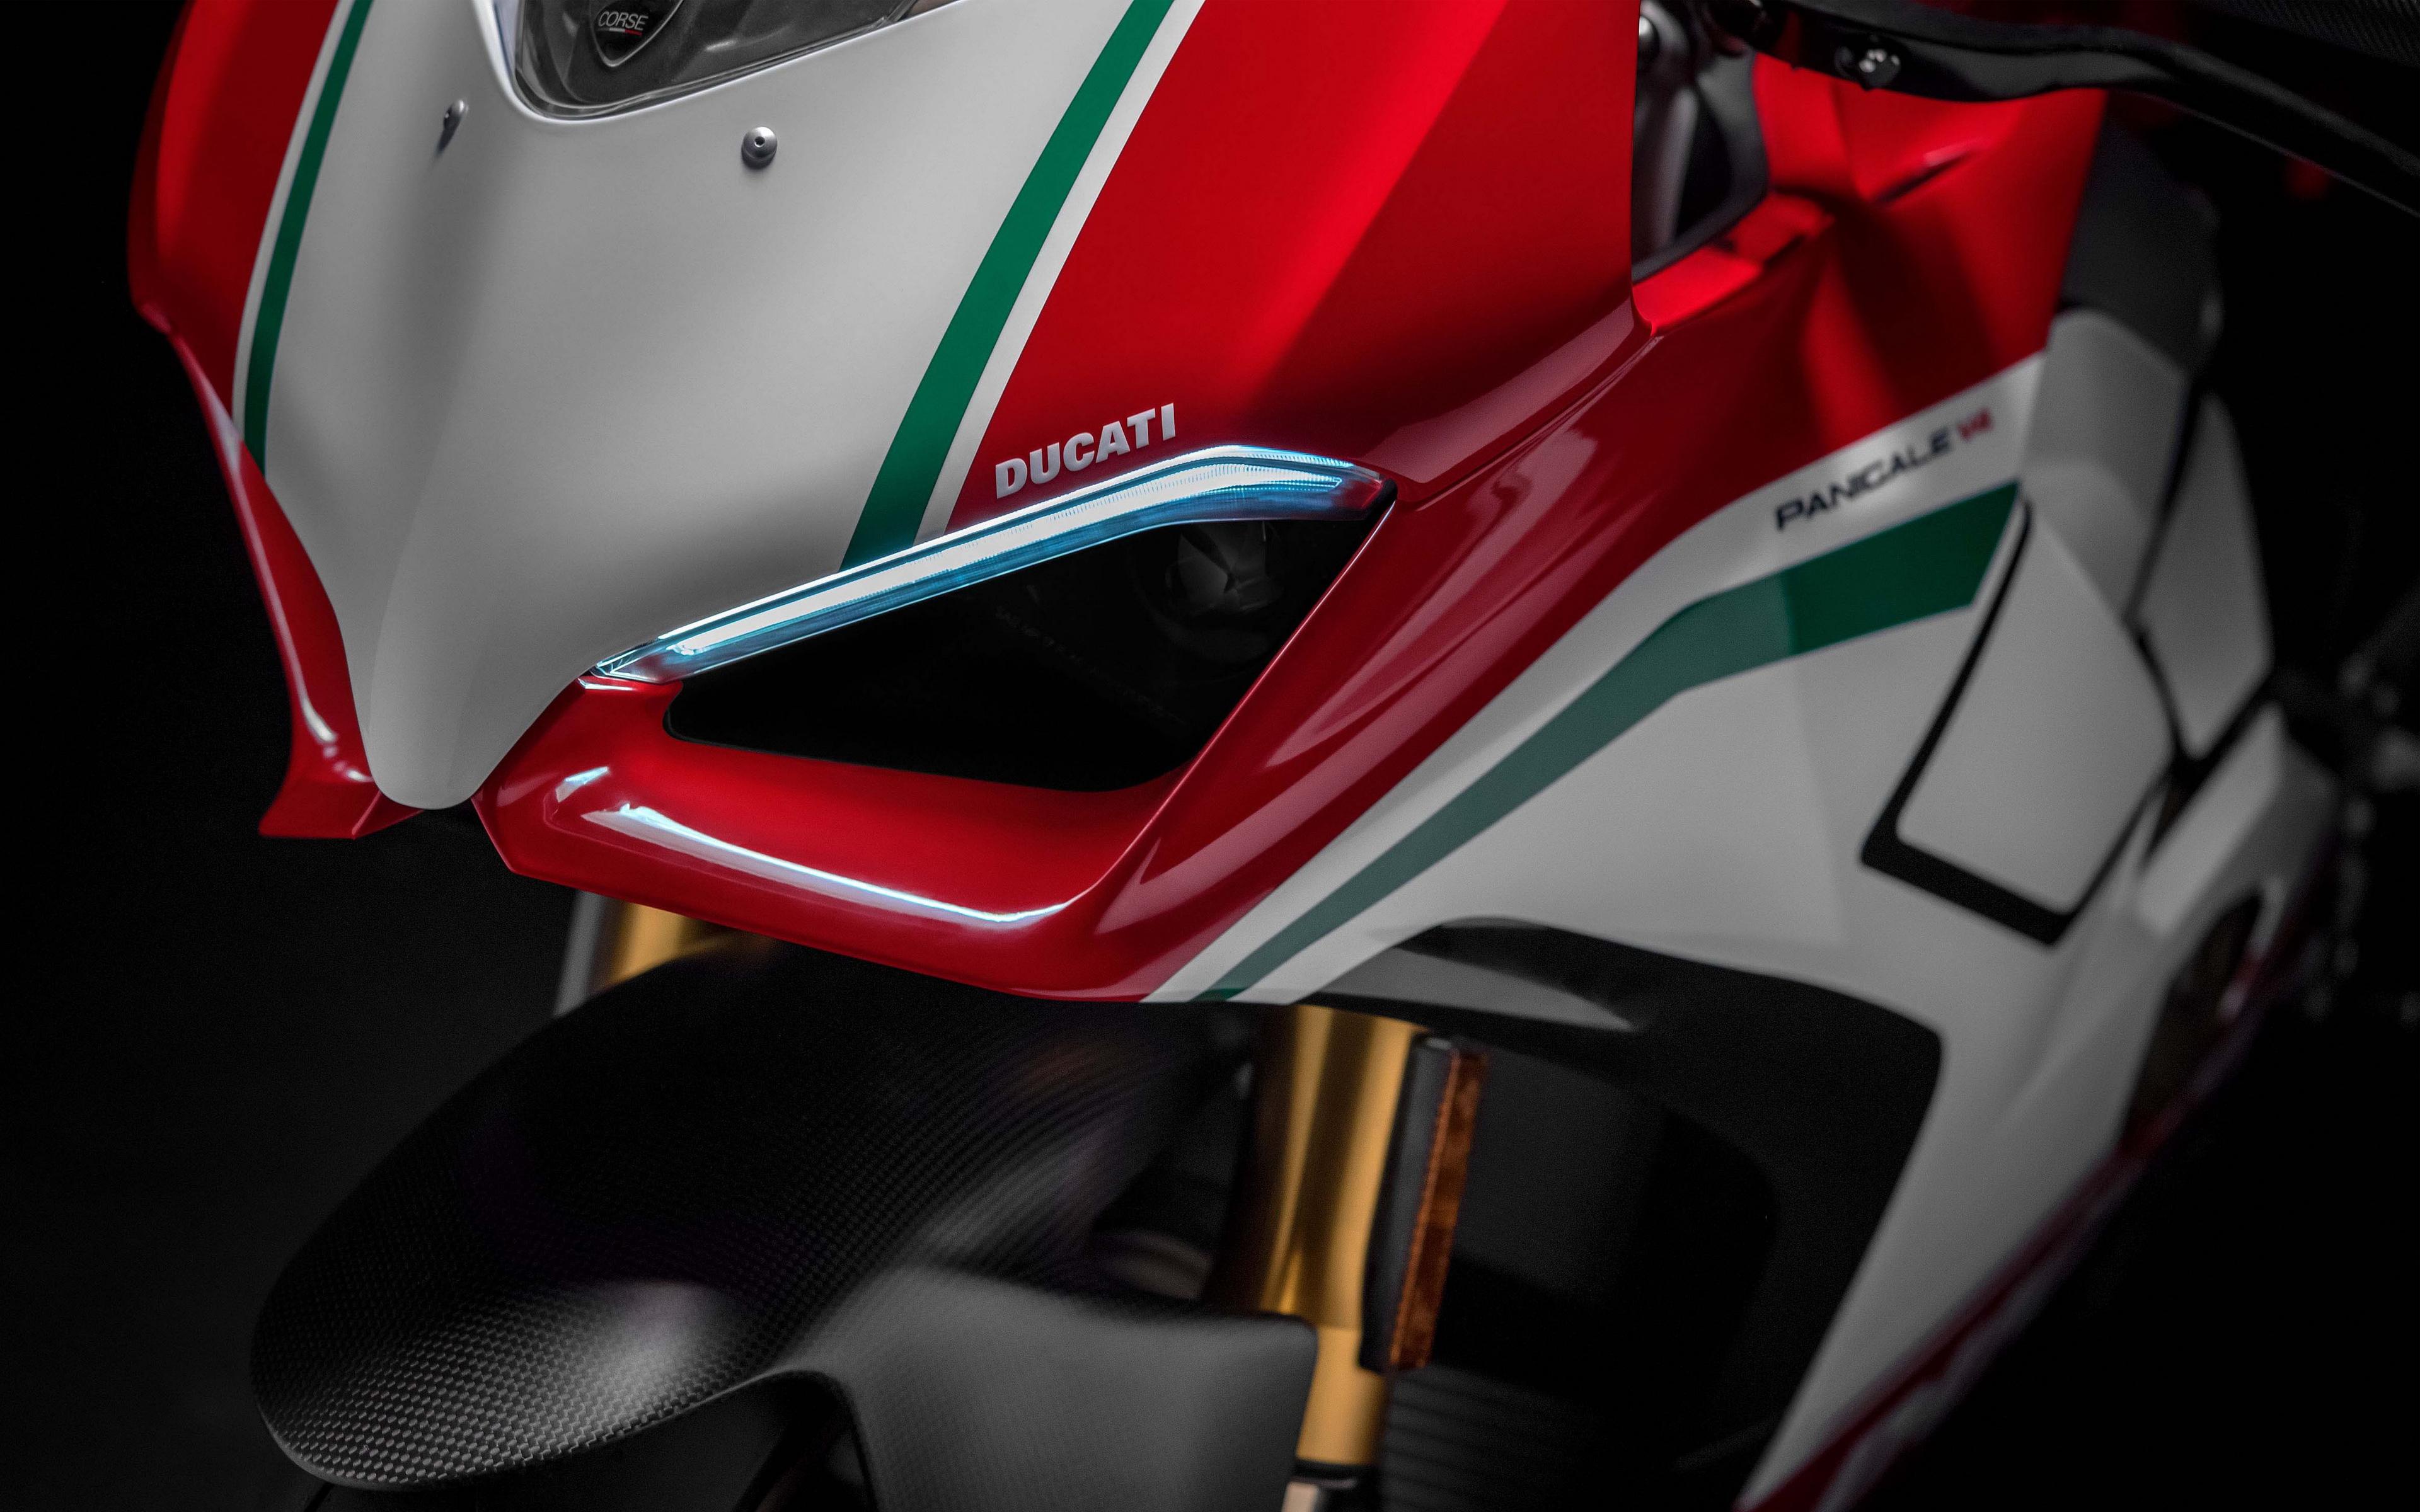 Wallpaper Blink of Ducati Wallpaper HD for Android, Windows